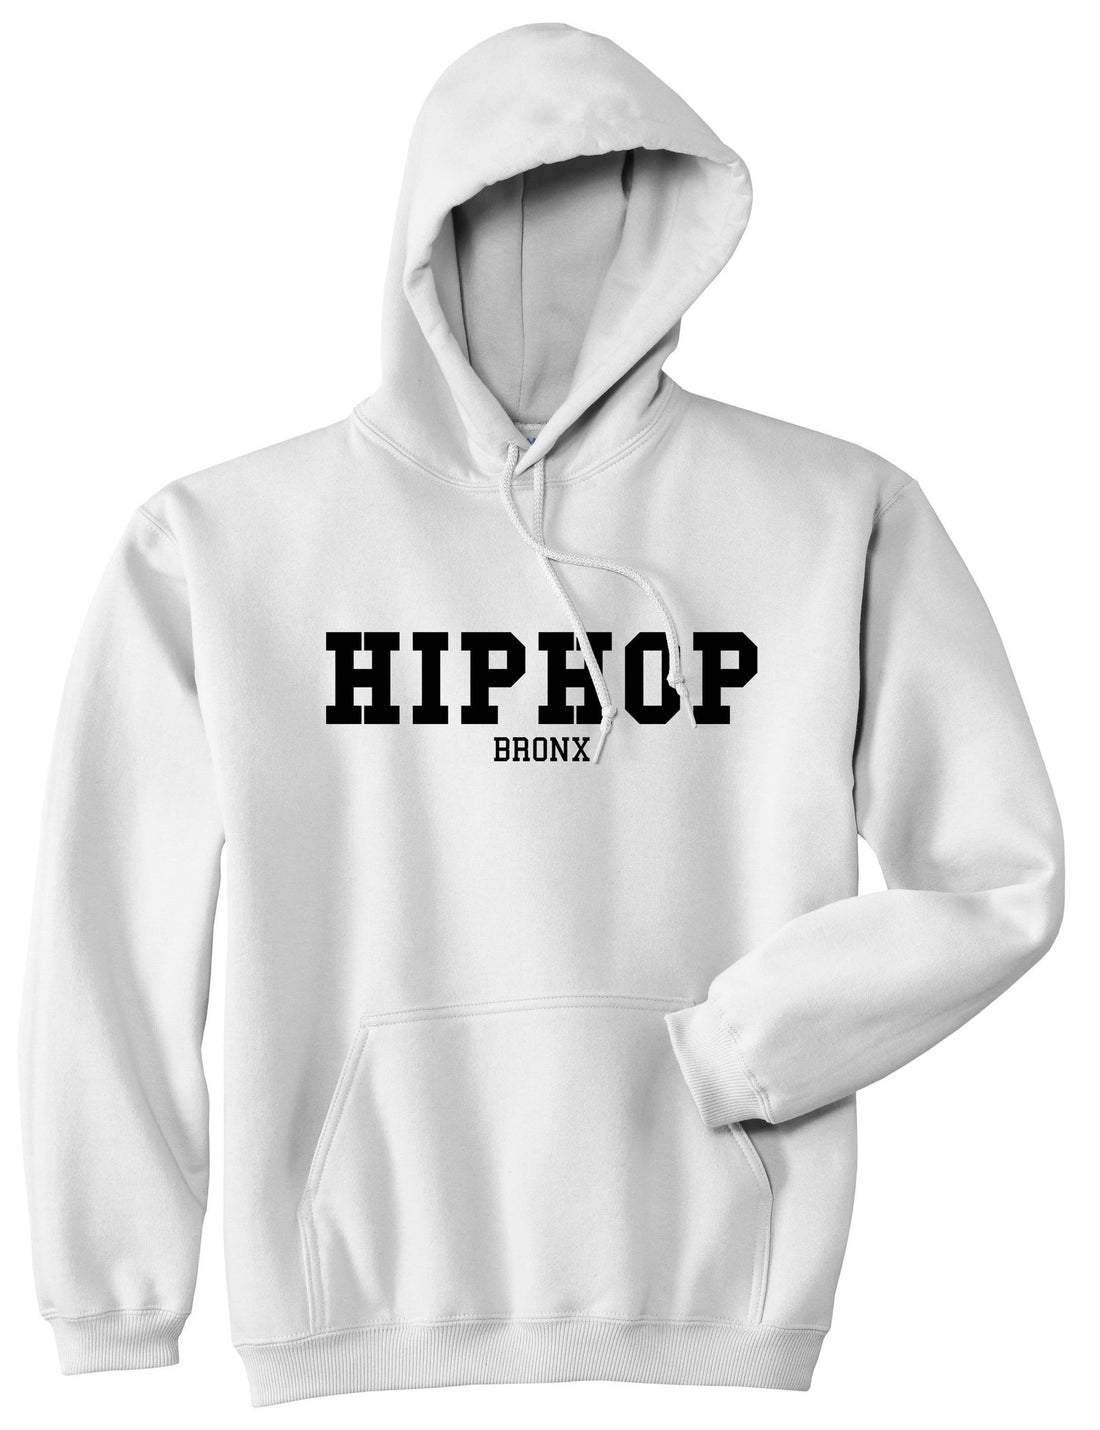 Hiphop the Bronx Pullover Hoodie Hoody in White by Kings Of NY